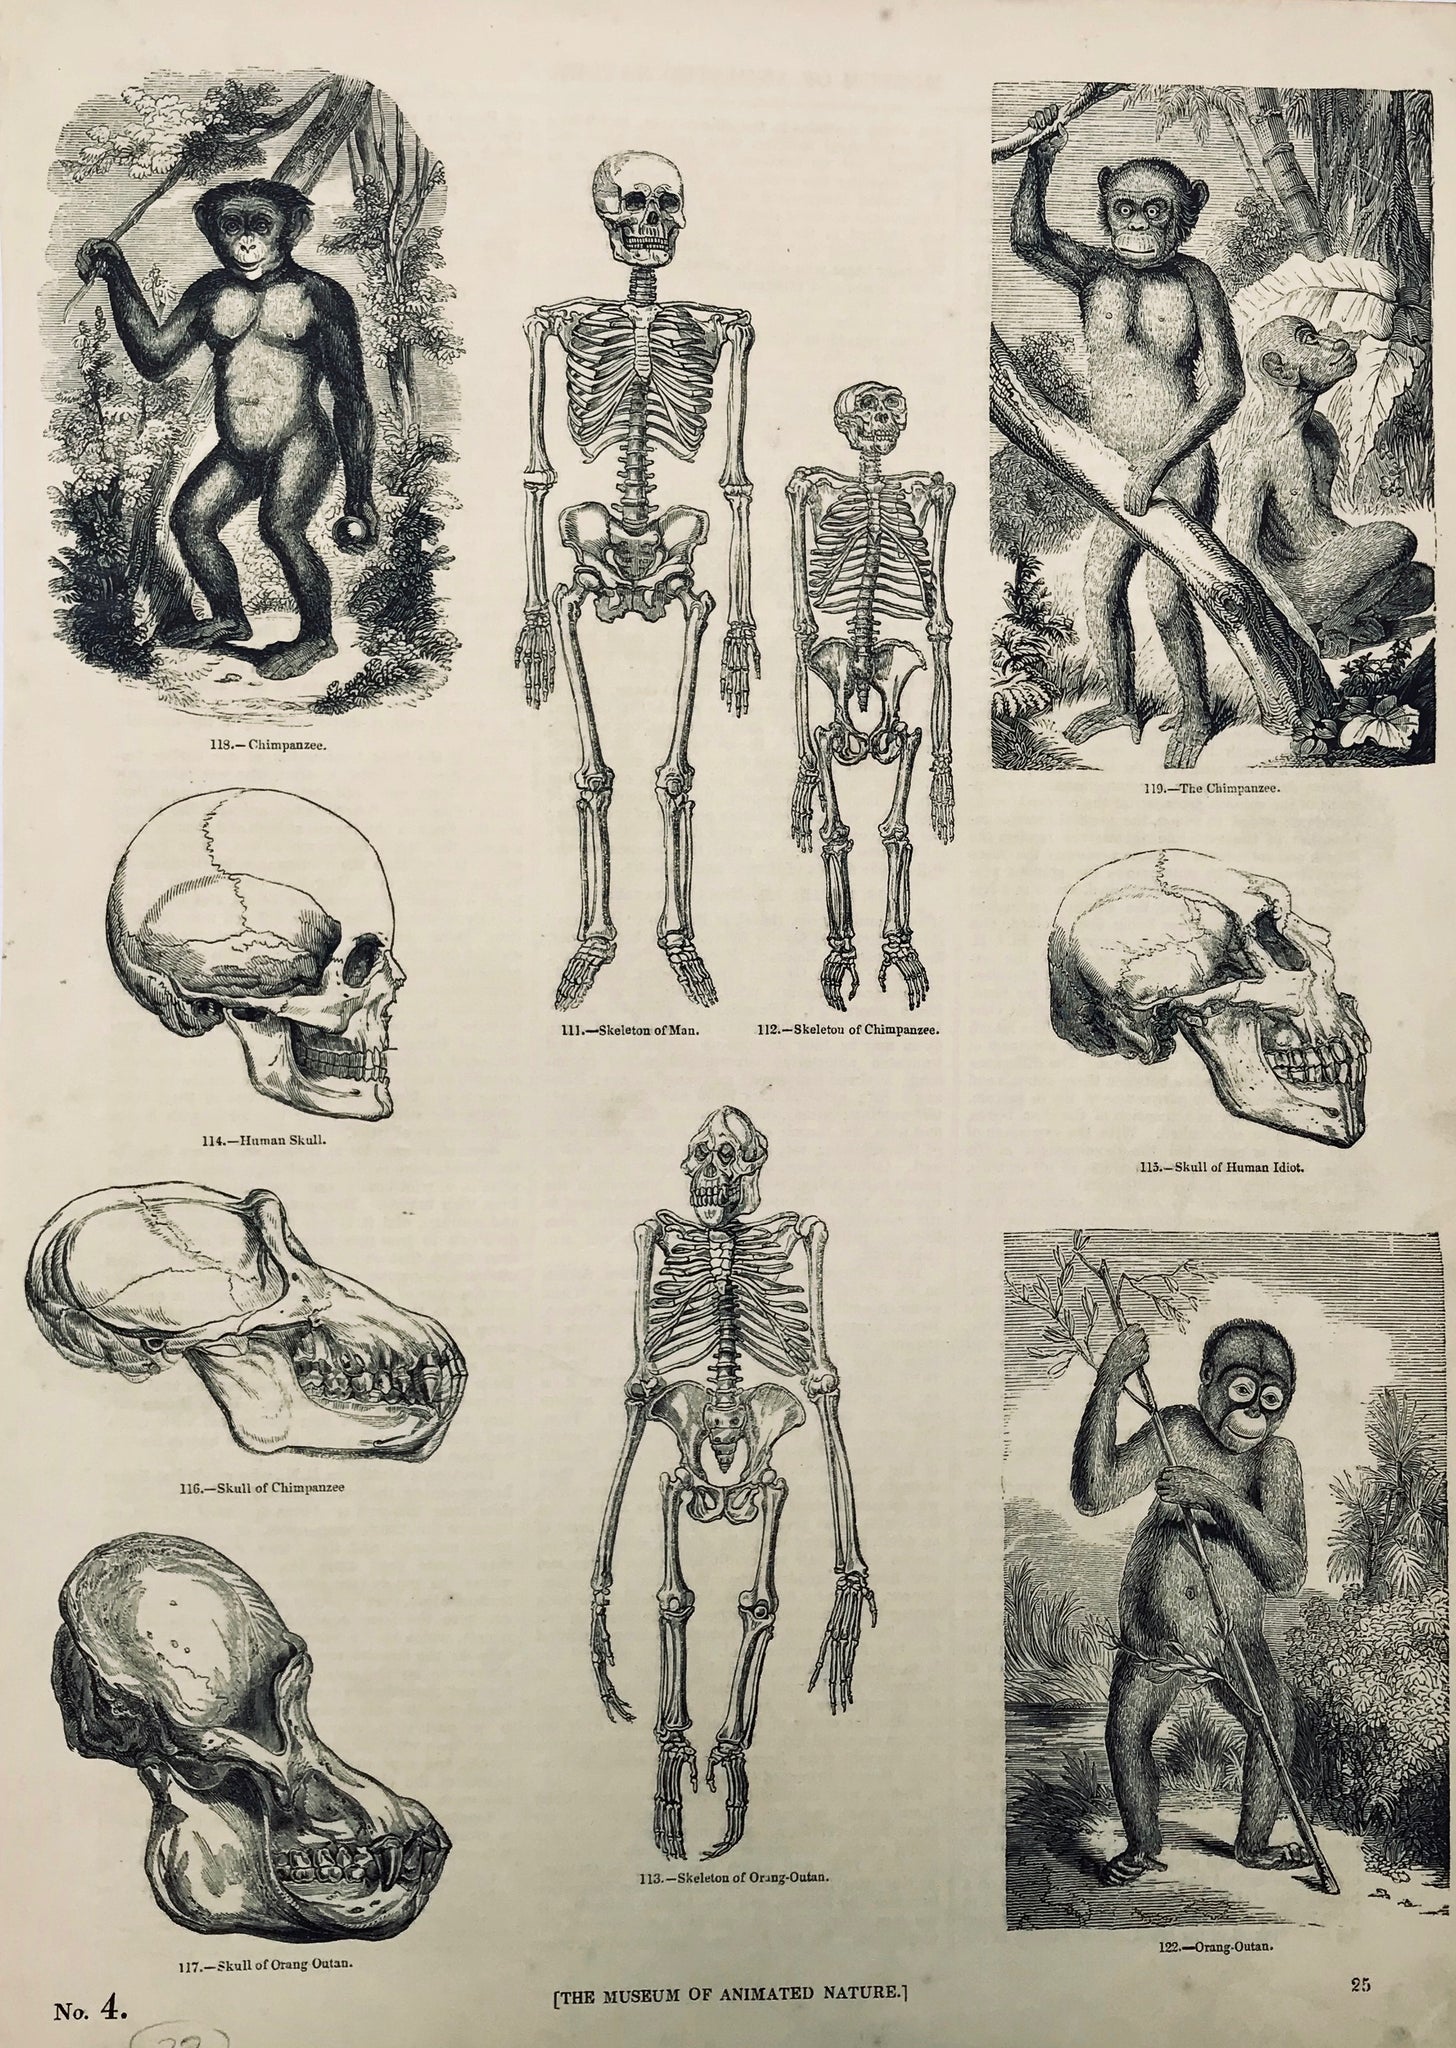 No Title  At the top of the print are comparisons and images of skulls and skeletons of humans and chimpanzes. At the bottom is a skull, skeleton and image of an orang-outan.  Wood engraving ca 1875. Backside is printed with information (in English) about apes, monkey, lemurs and chimpanzes. Print has two tiny repaired tears on right margin edge. A few minor spots. Light creasing in lower right margin corner.